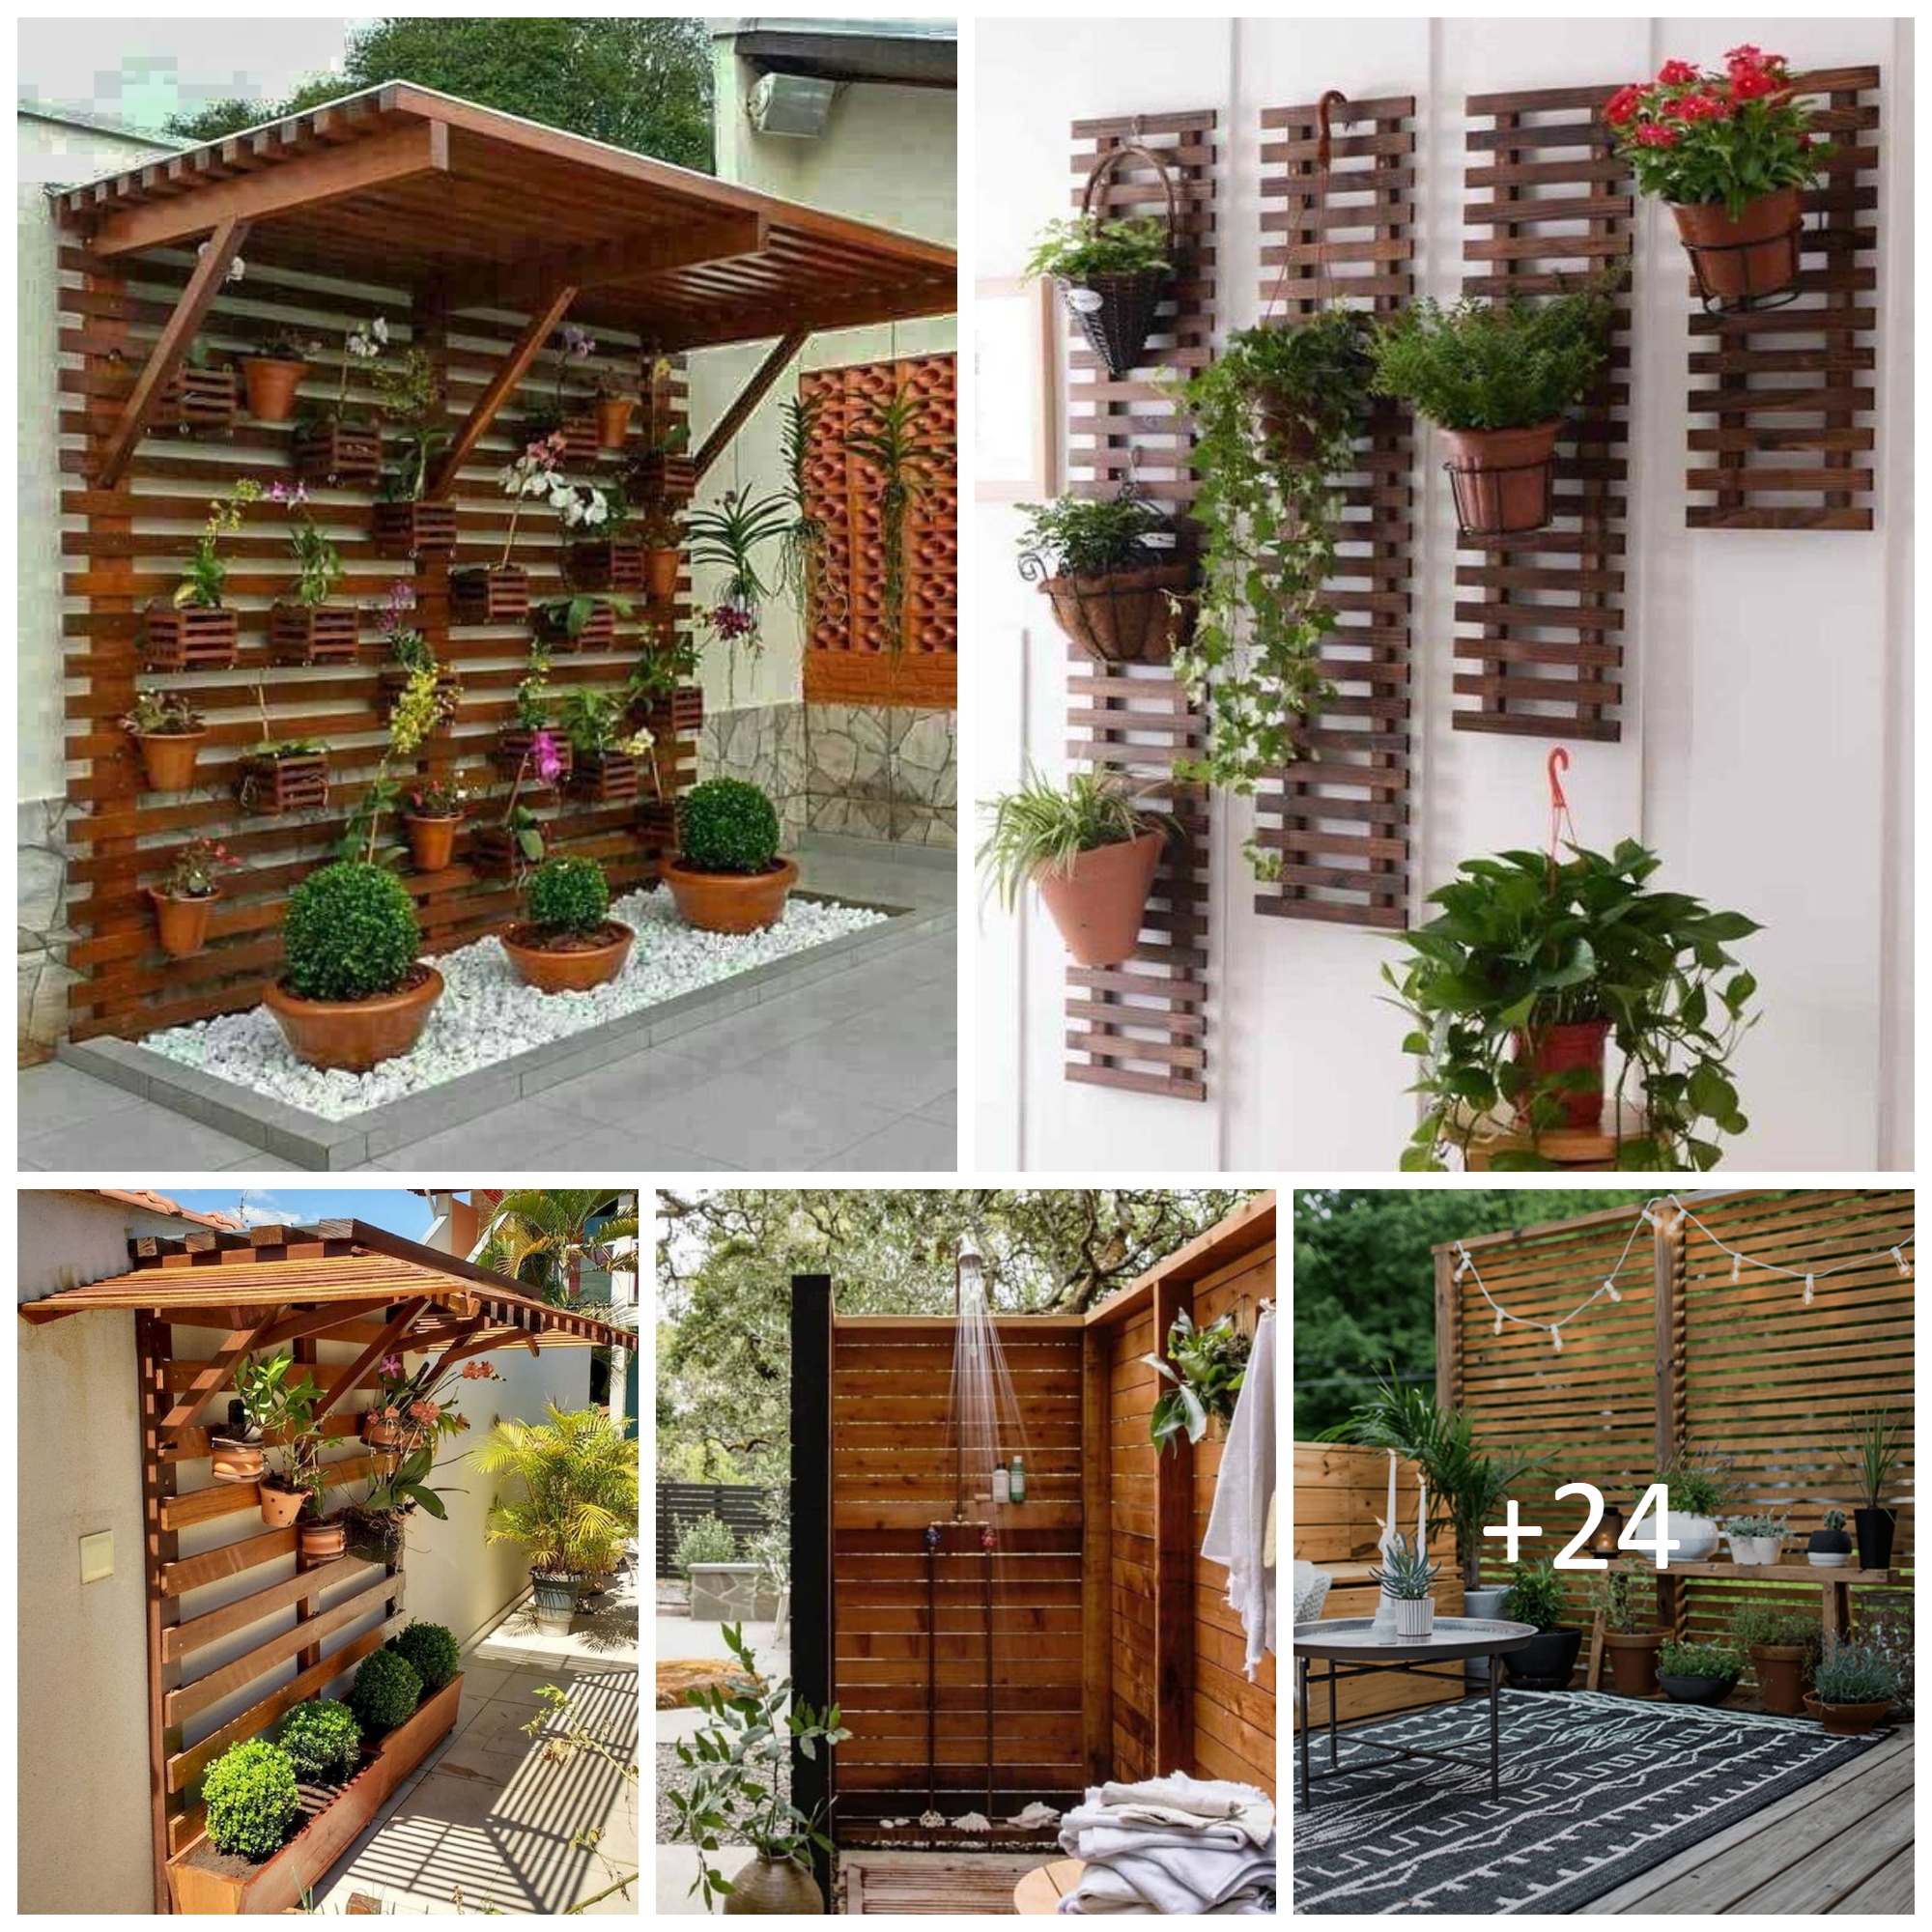 Landscaping Garden And Backyard Ideas With Pallets